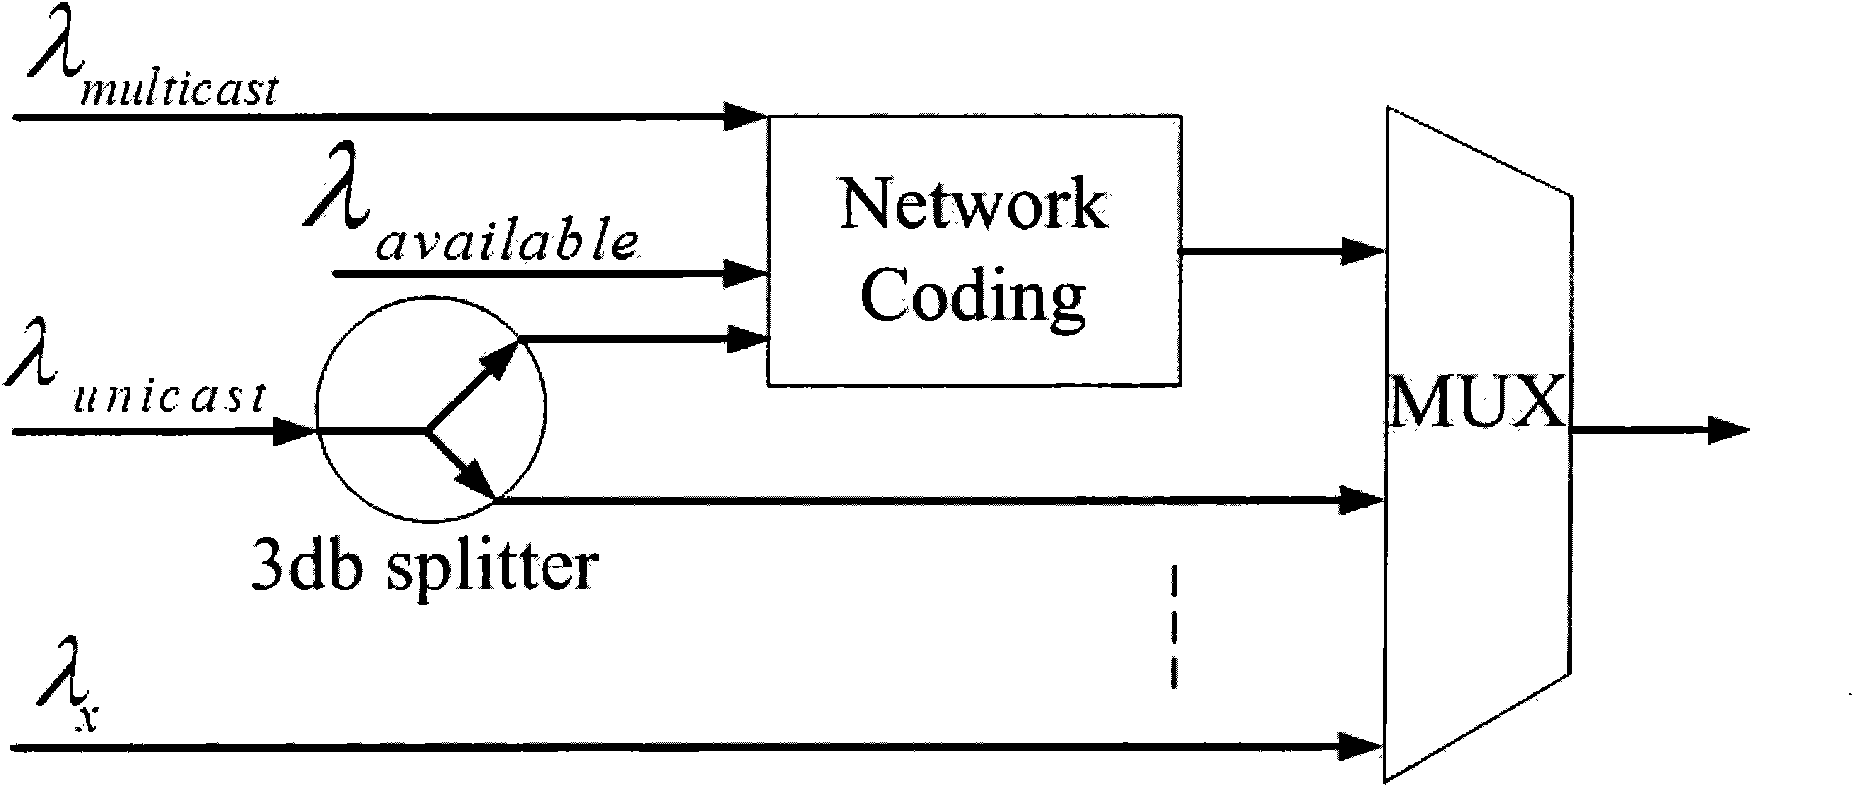 Network coding based wavelength conflict solution in WDM (Wavelength Division Multiplex) multicast network